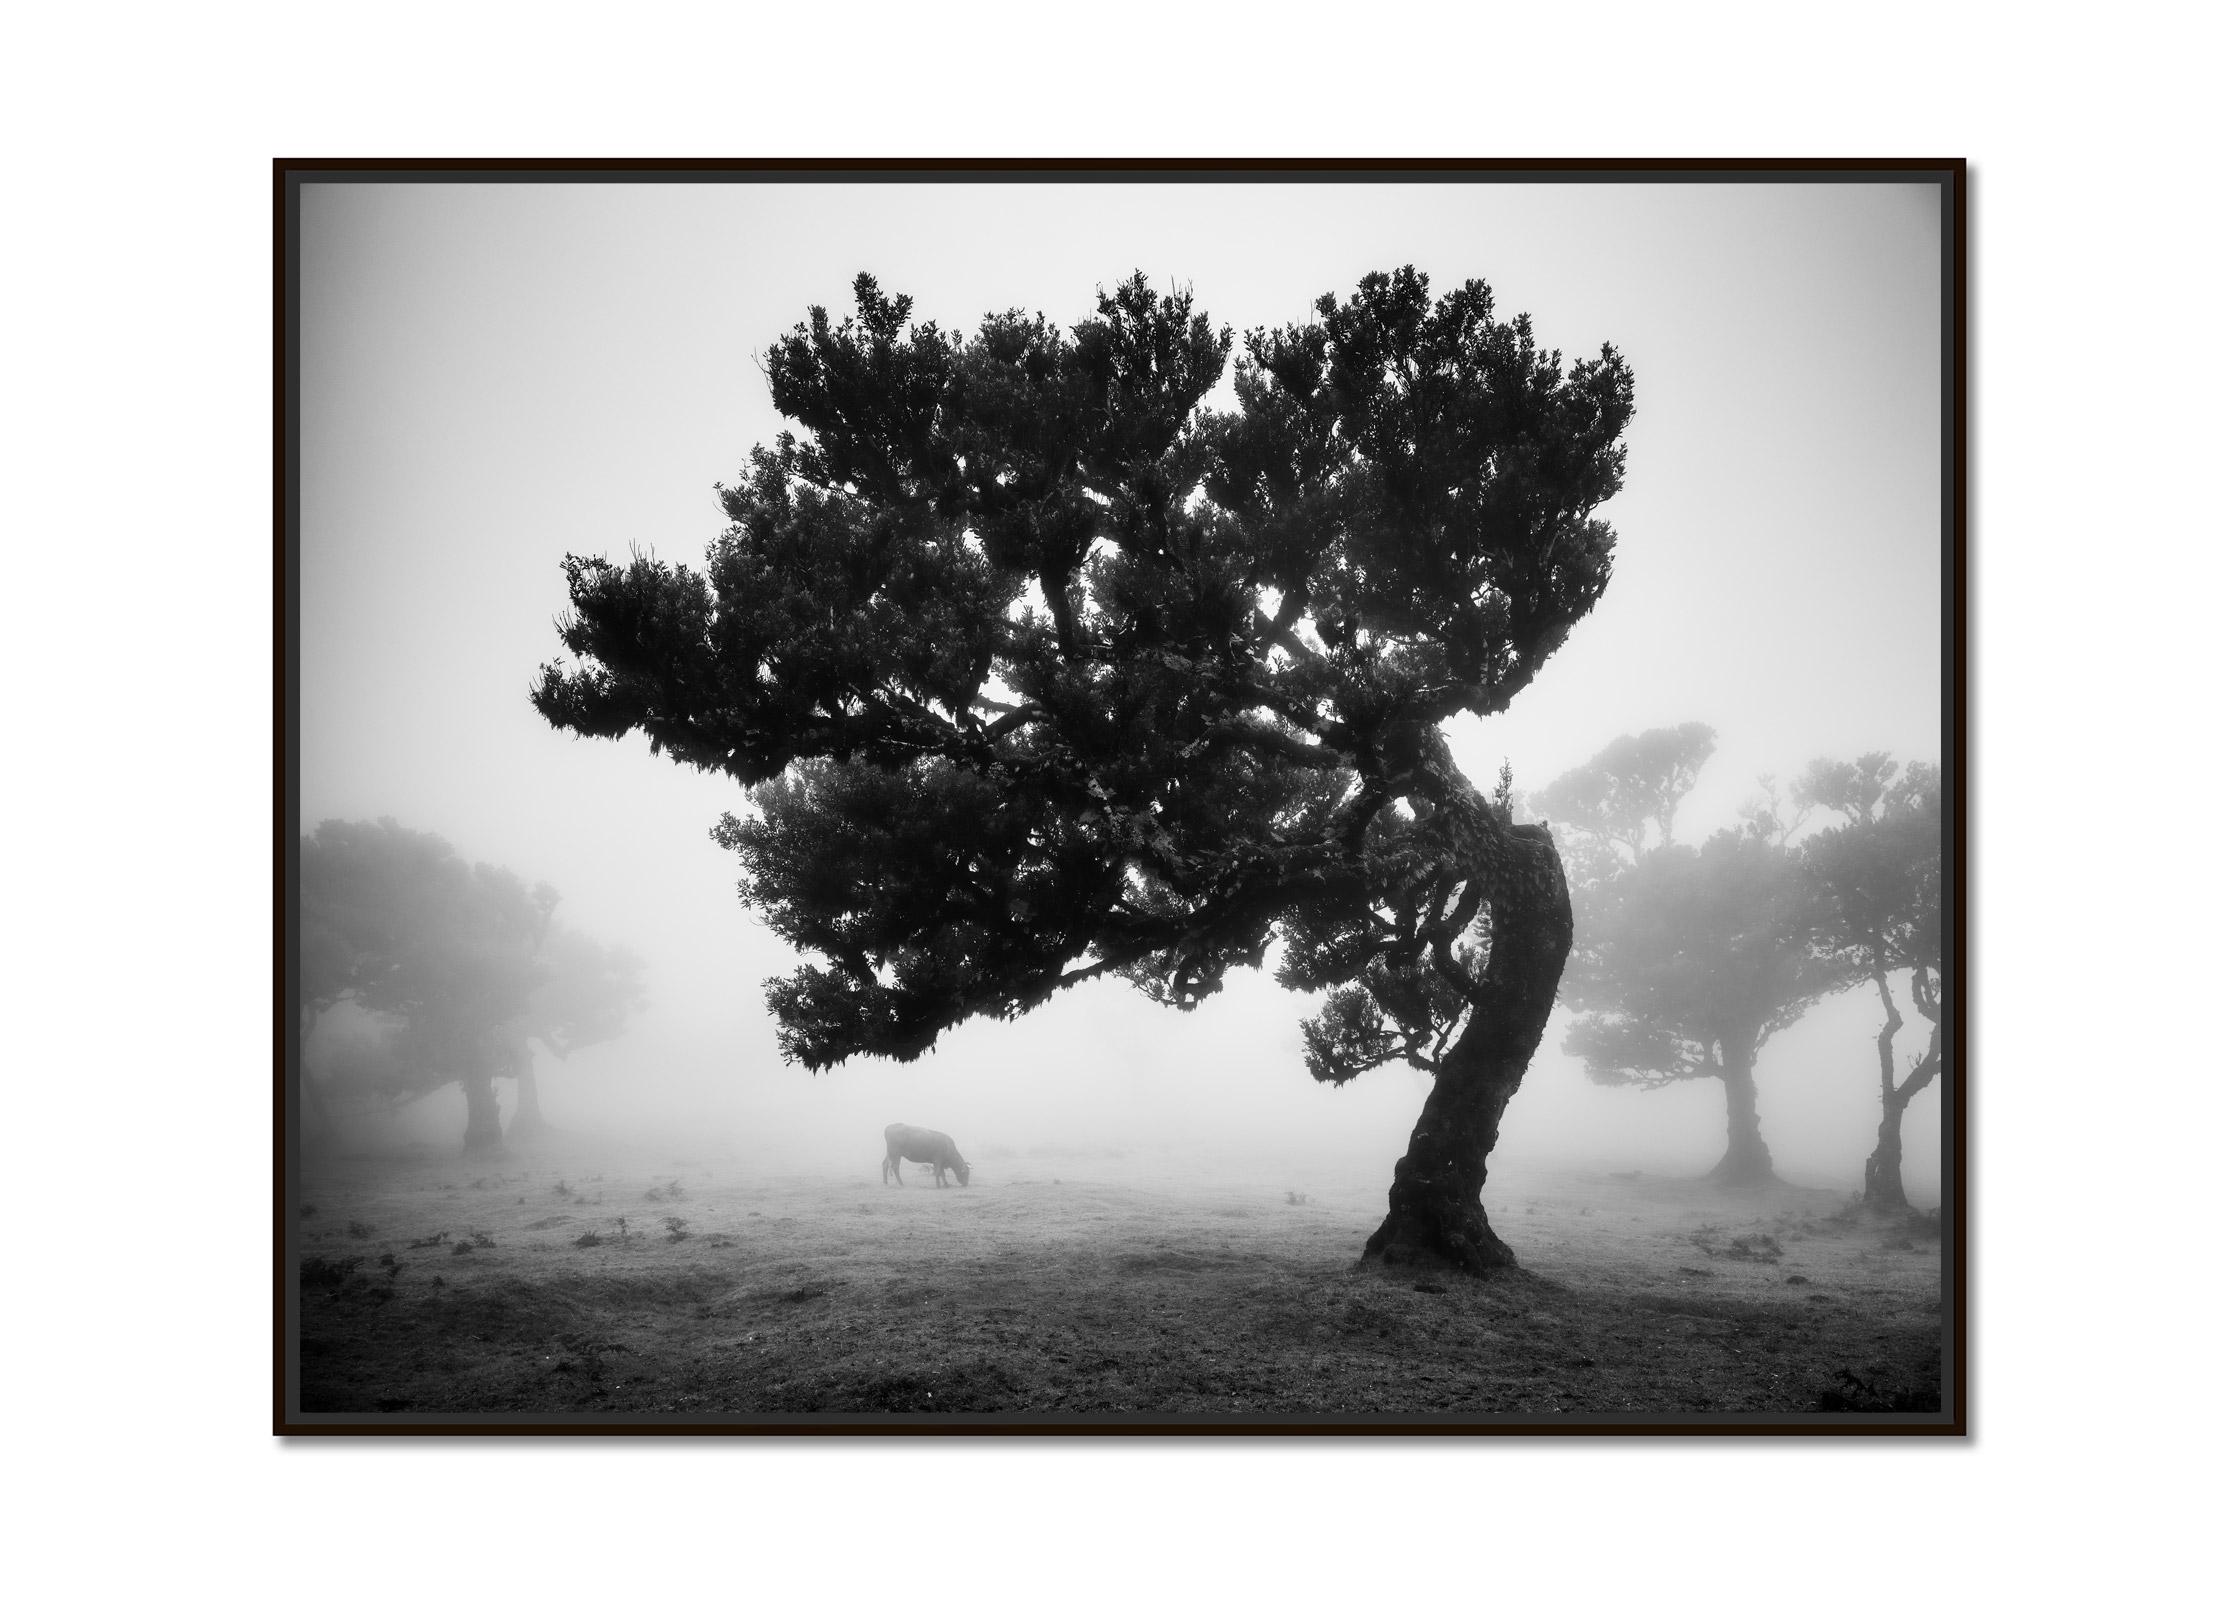 Cows on the foggy pasture, misty Morning, black and white photography, landscape - Photograph by Gerald Berghammer